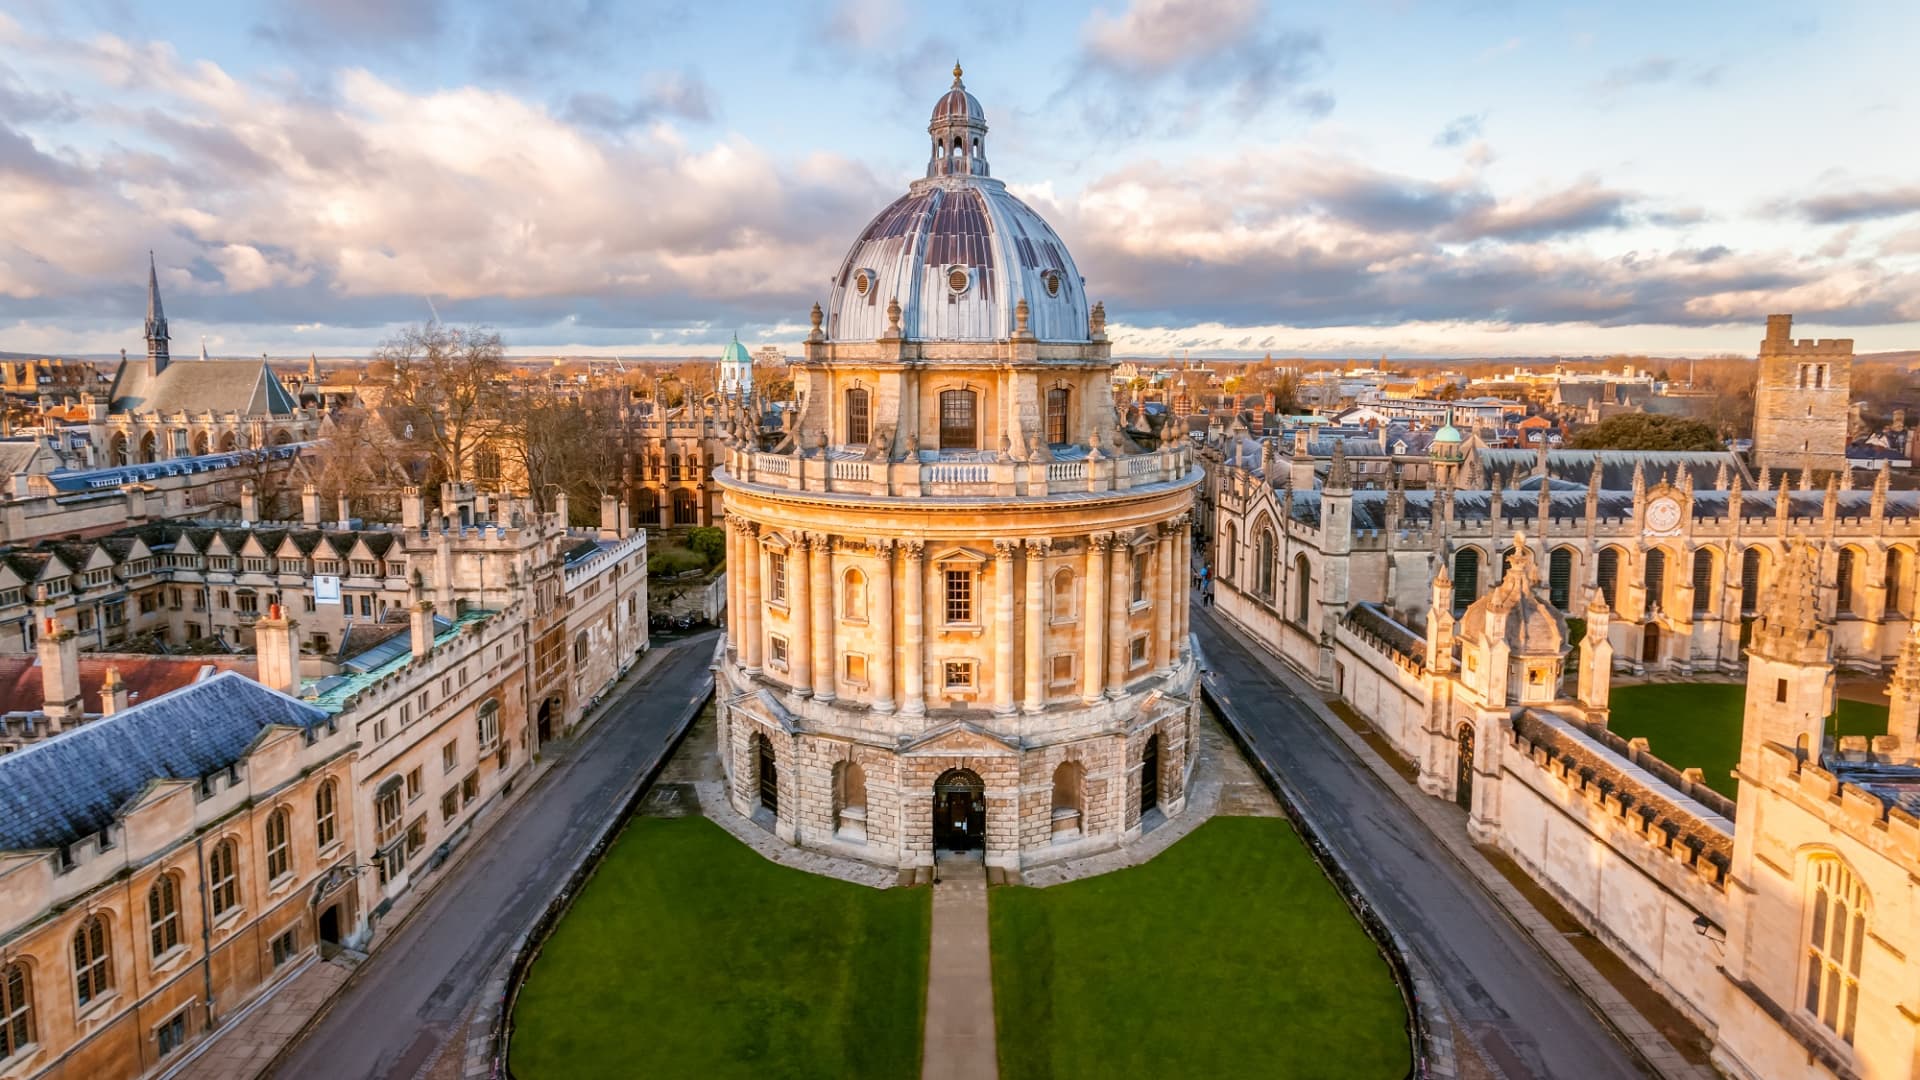 The U.K. is home to three of the world's top 10 universities, according to Times Higher Education, including Oxford University.